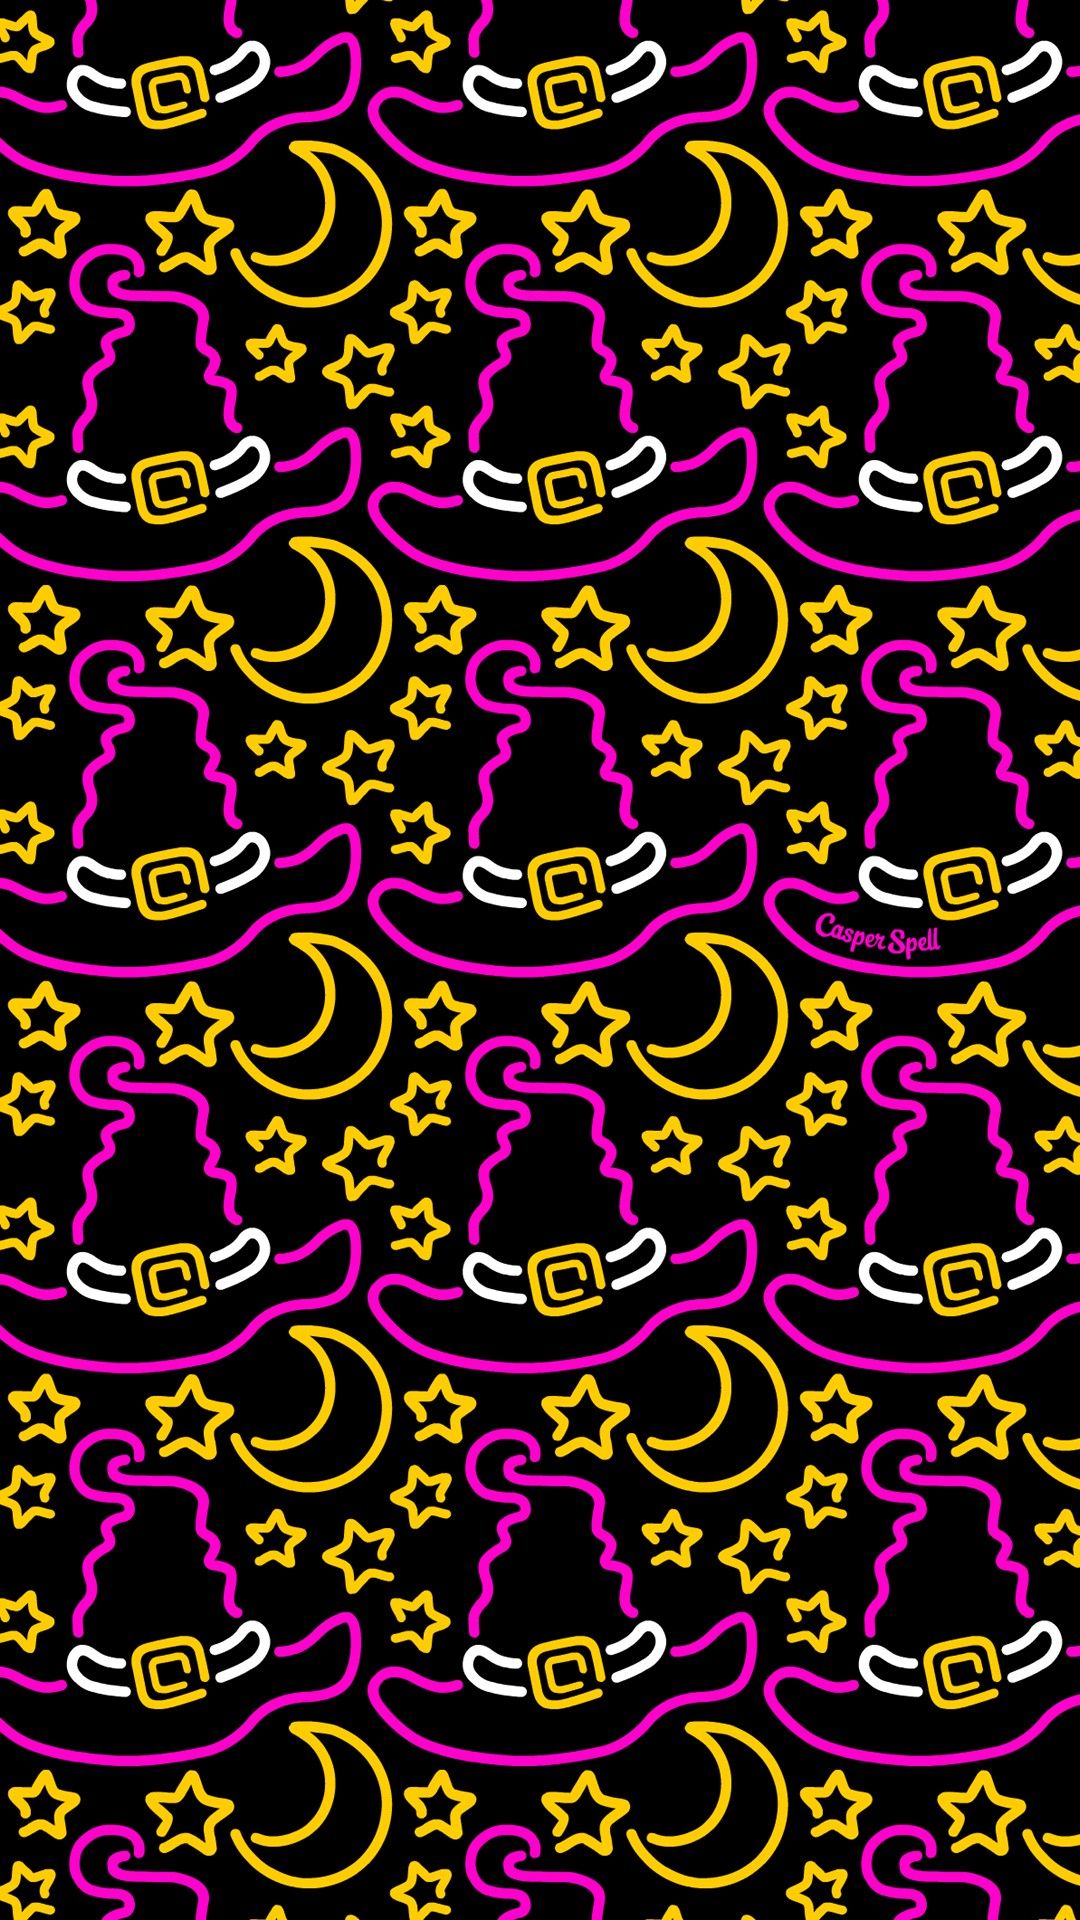 Neon witch pattern sign witches witchcraft coven Halloween cute spooky repeat surface design art ill. Halloween wallpaper, Witchy wallpaper, Halloween background